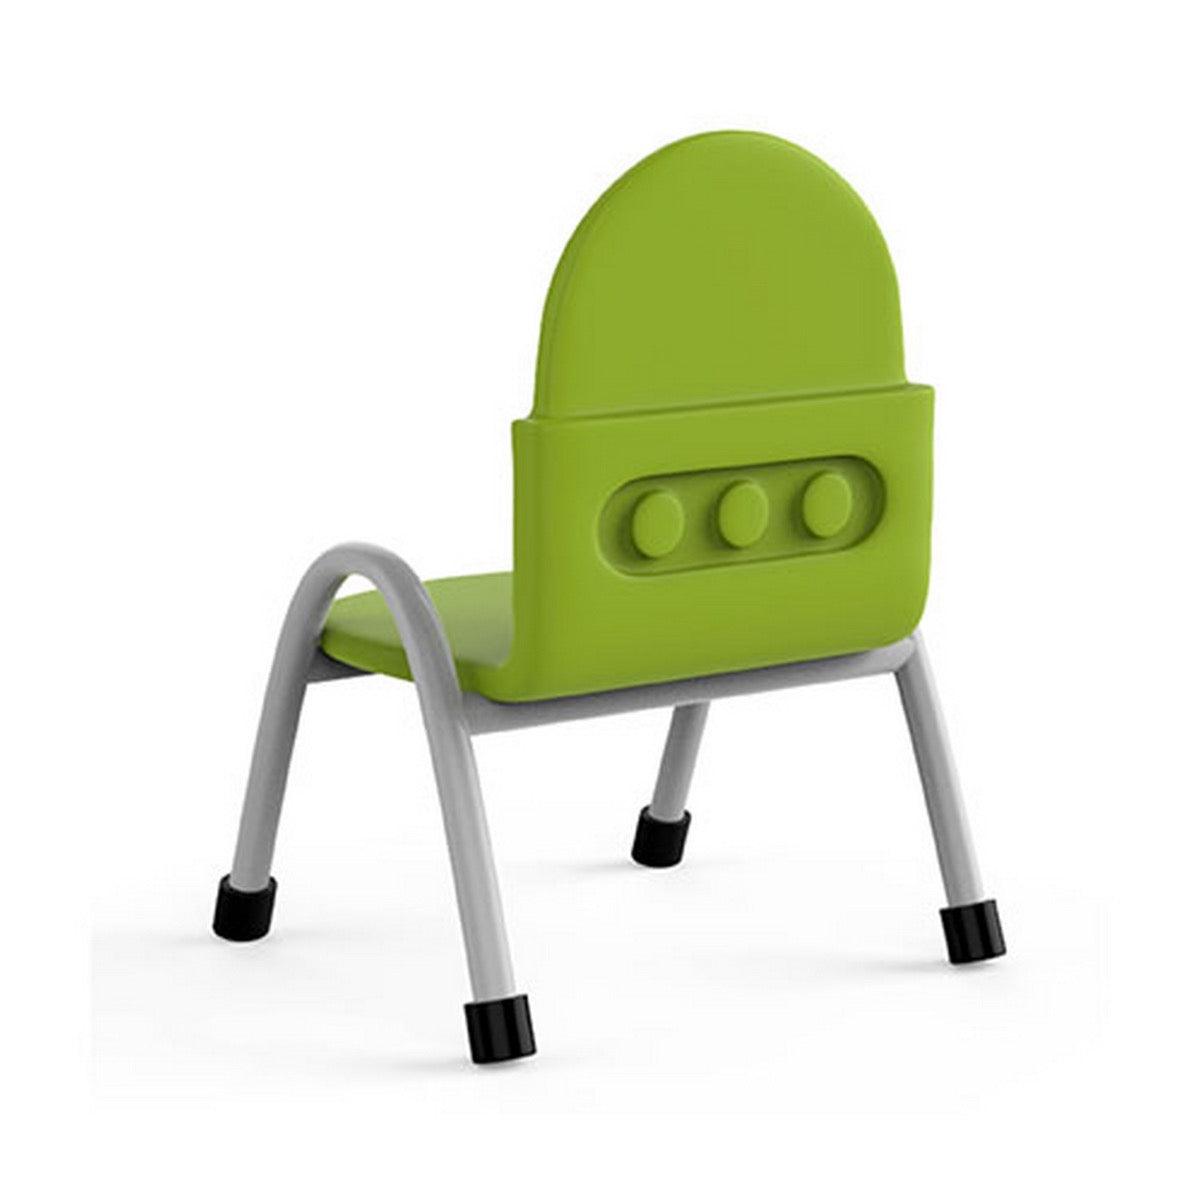 Ok Play Robo Chair, Study Chair, Sturdy And Durable Chair, Plastic Chair, Perfect For Home, Creches And School, Green, 5 to 10 Years, Height 10 Inches